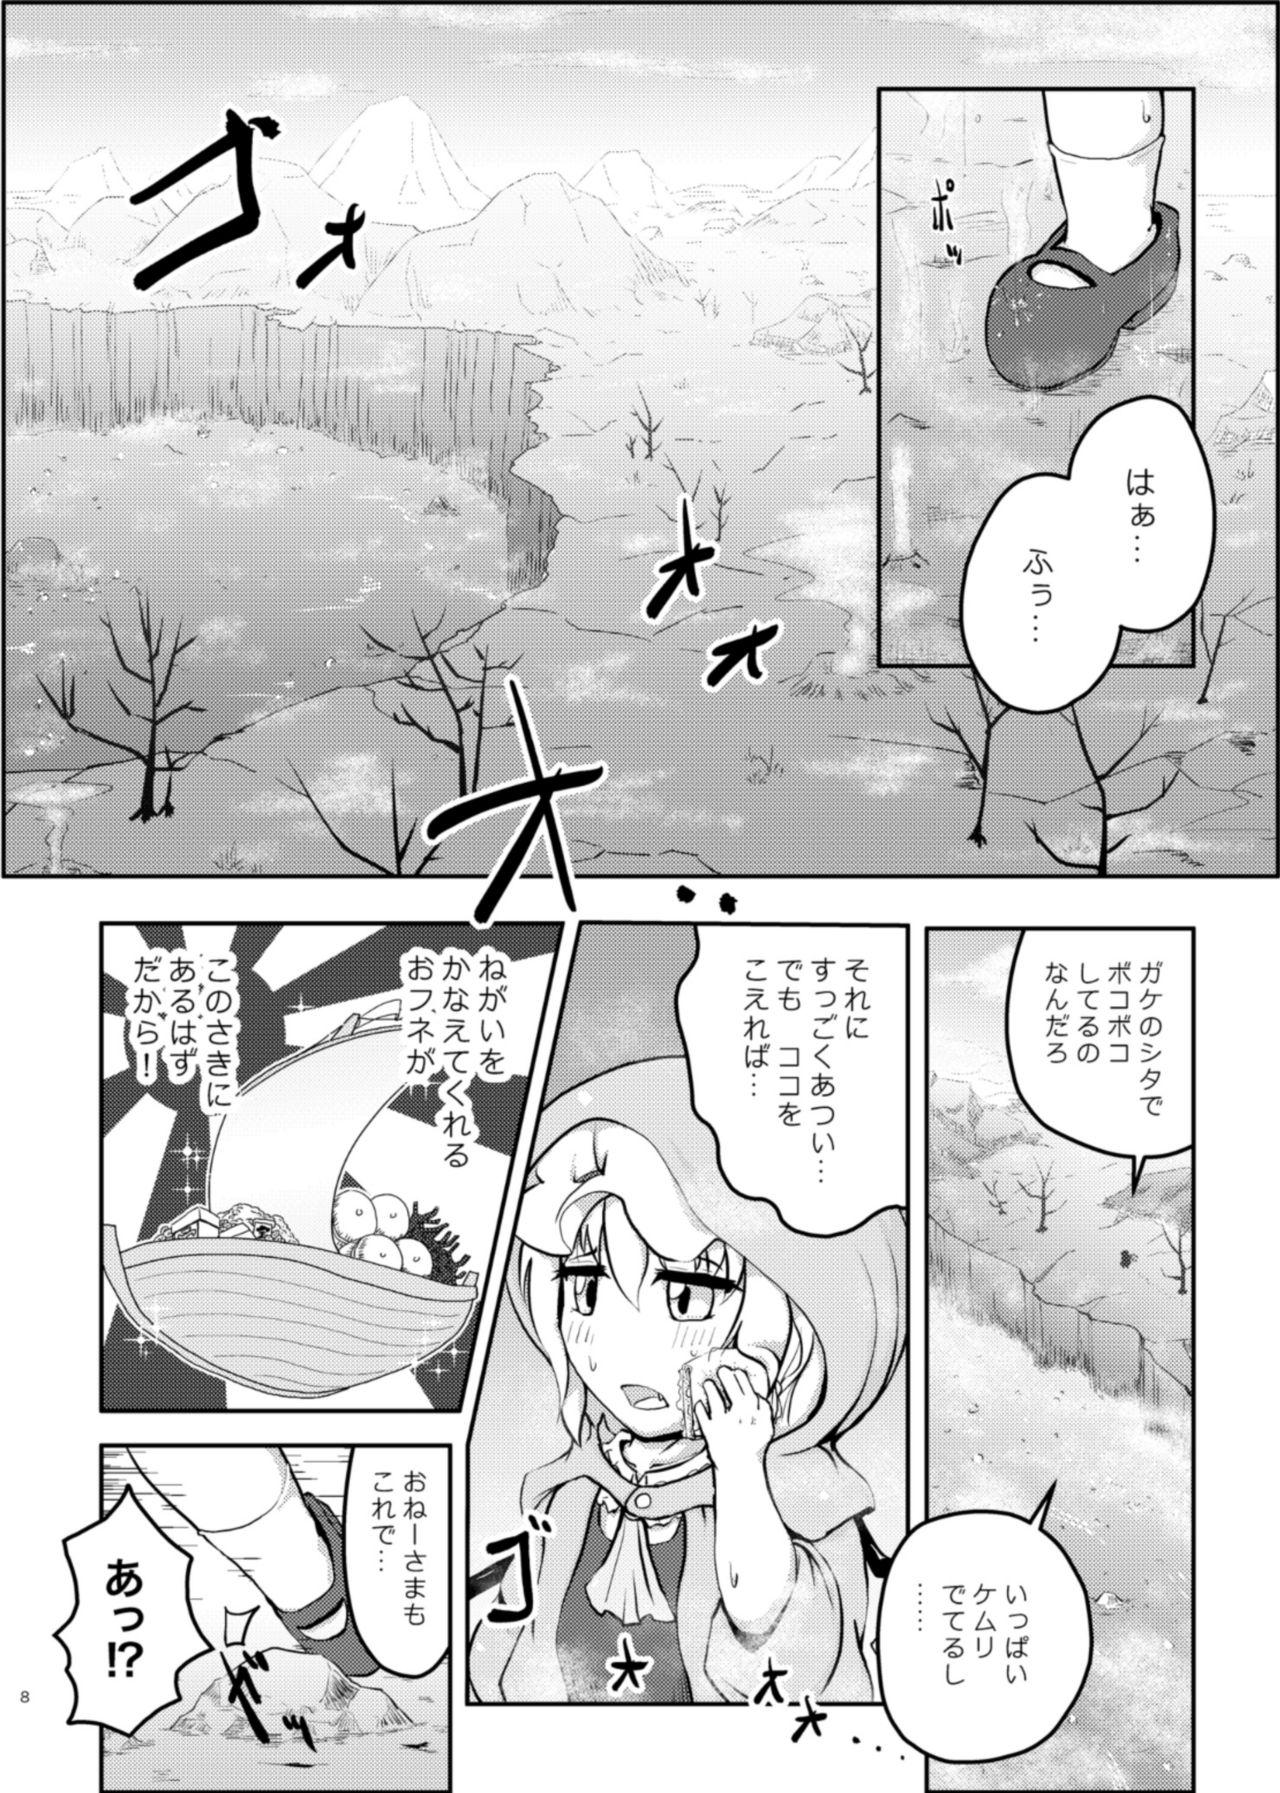 Balls Scarlet Conflict 2 - Touhou project Pija - Page 8